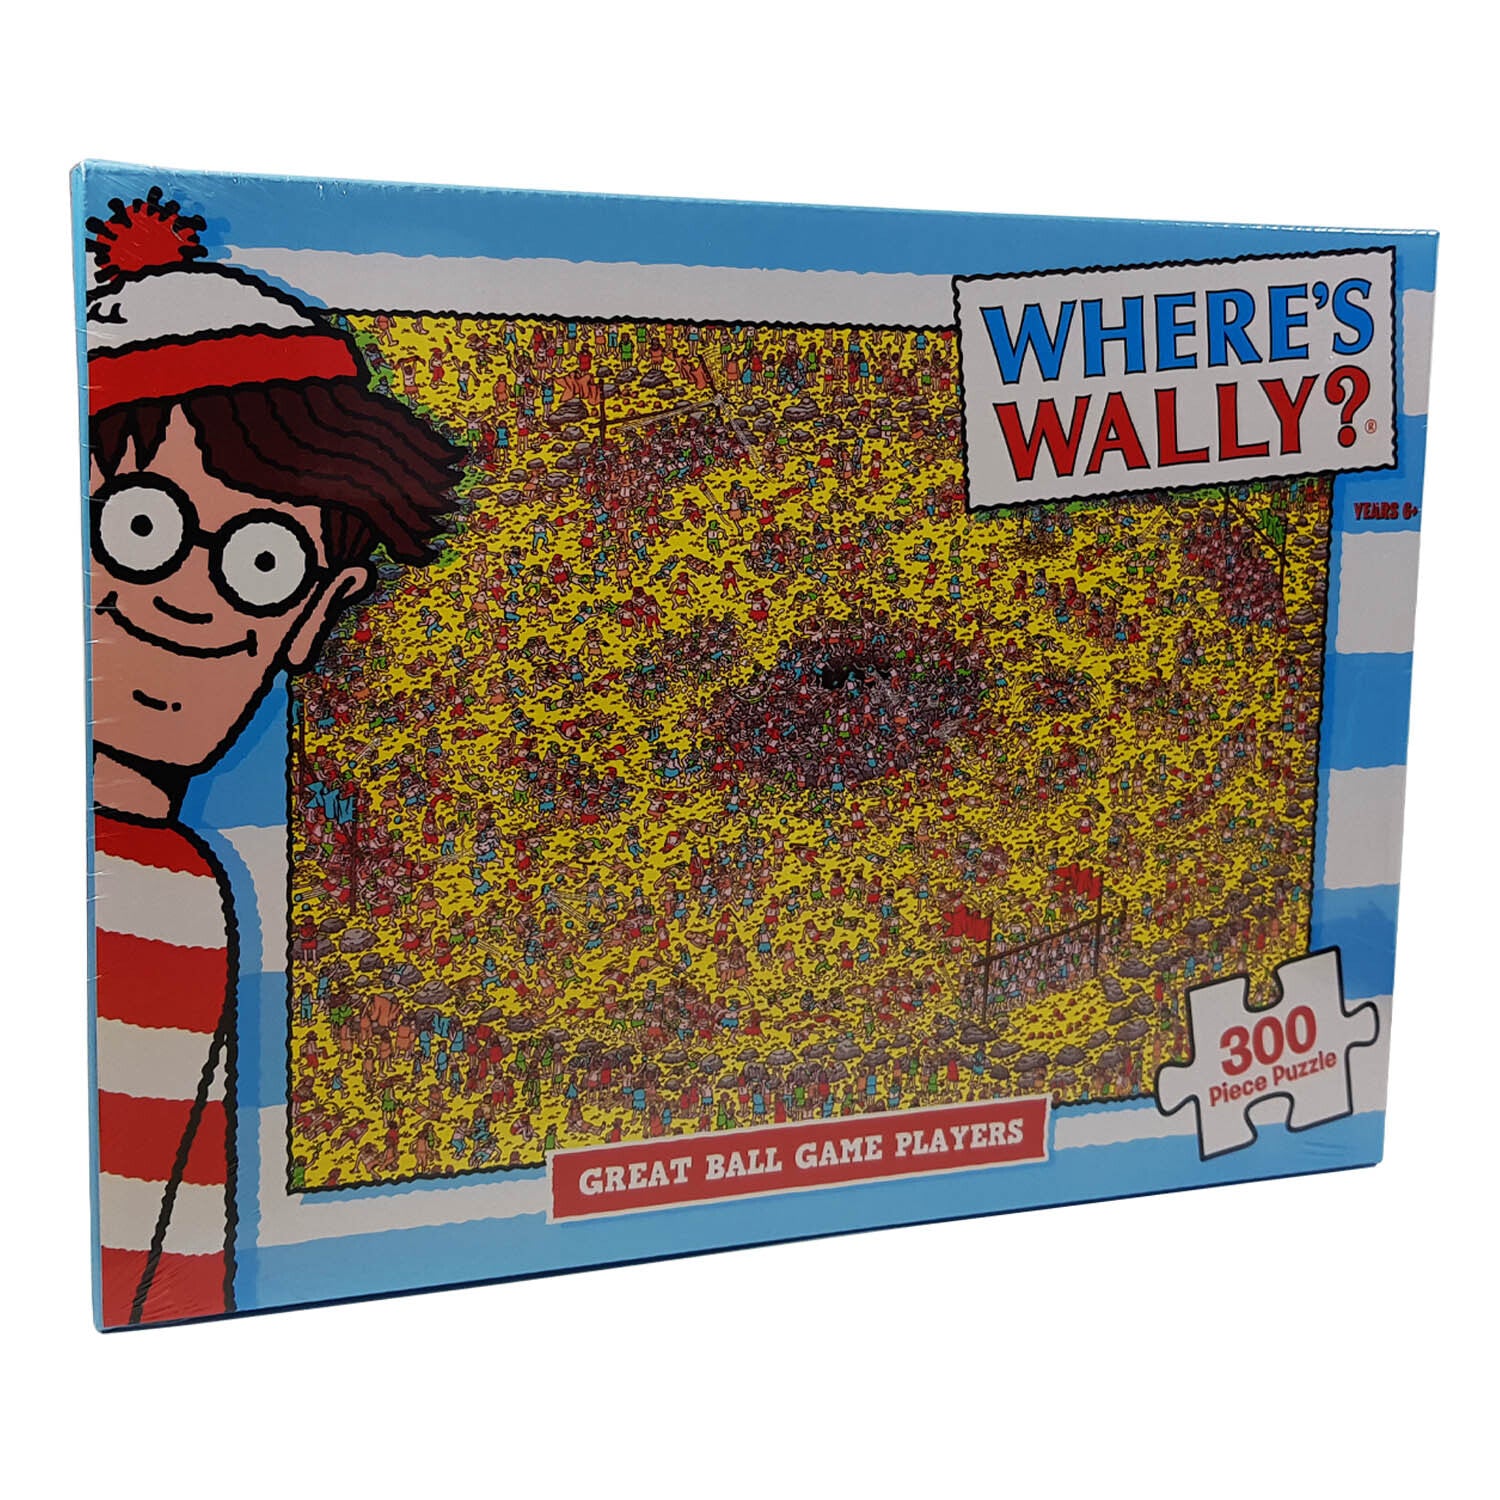 Wheres Wally? 300pc Jigsaw - Great Ball Game Players